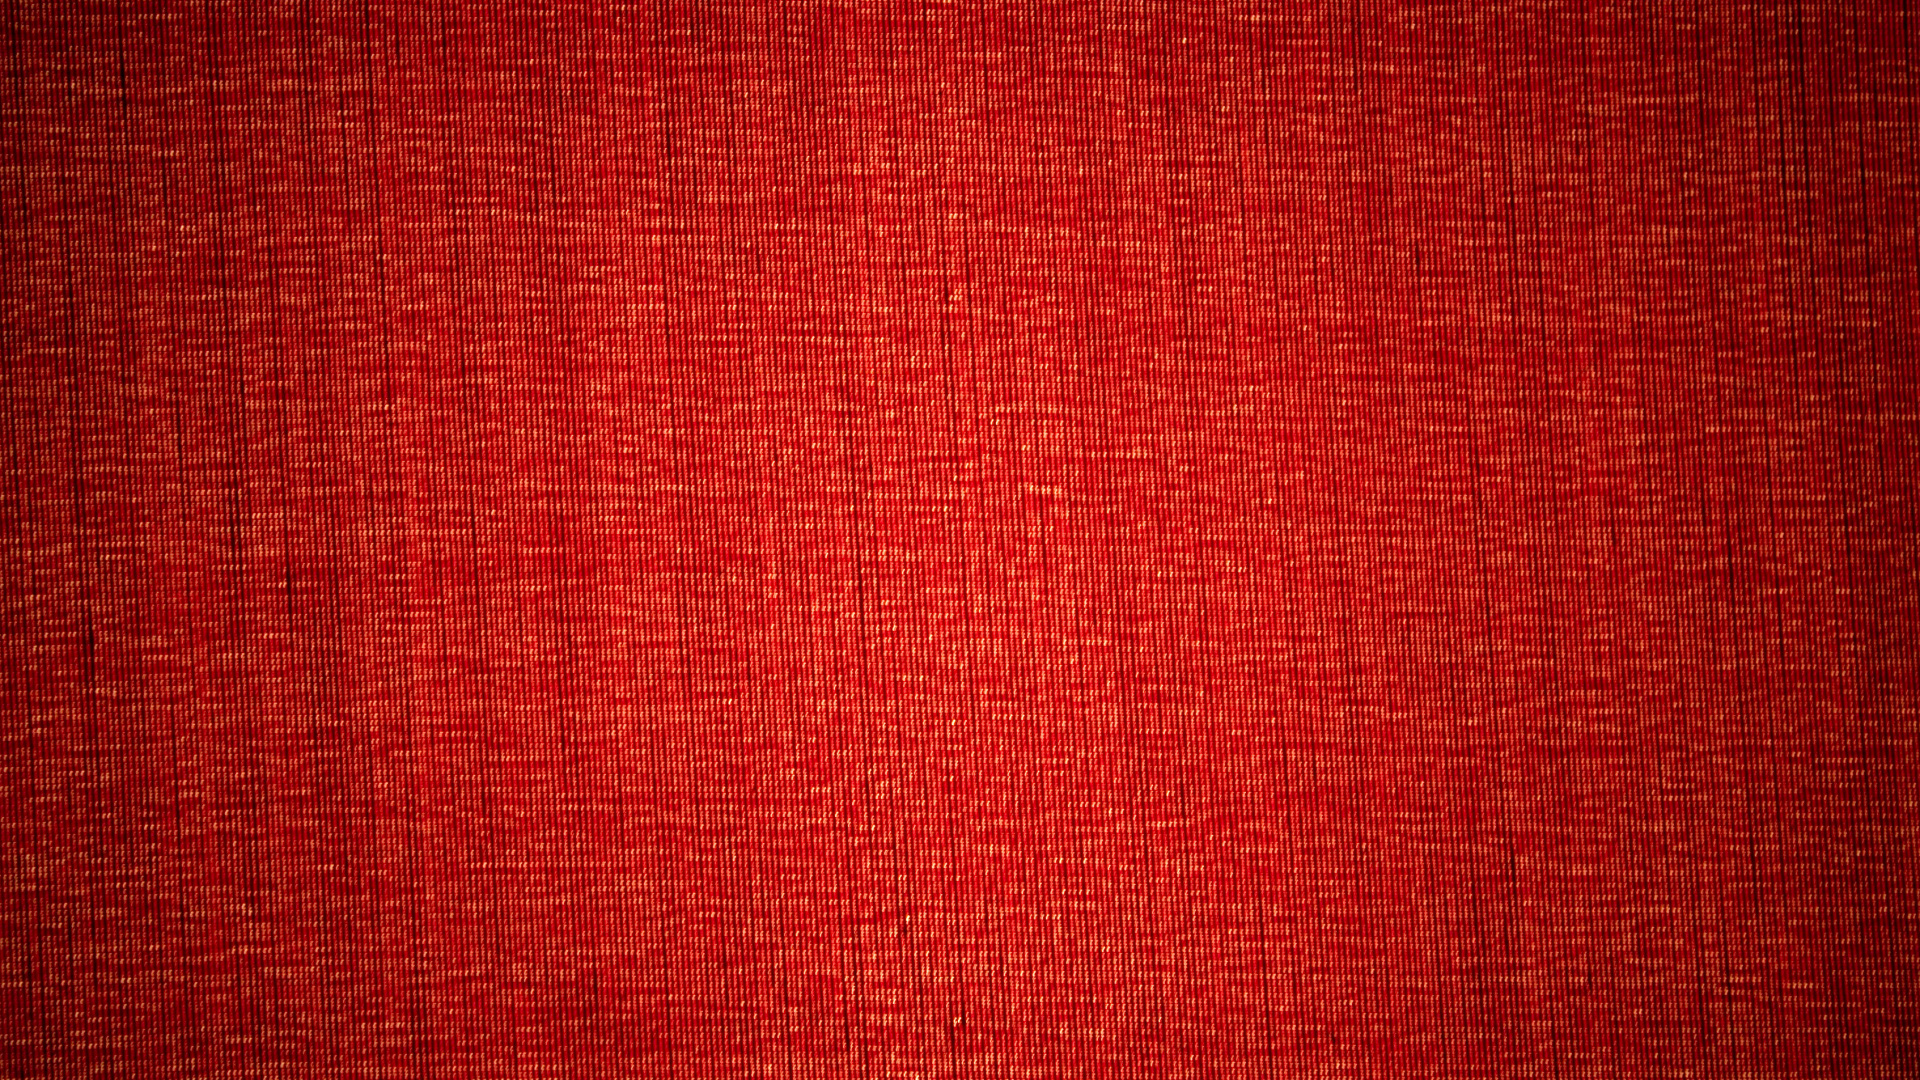 Red Textile in Close up Image. Wallpaper in 1920x1080 Resolution